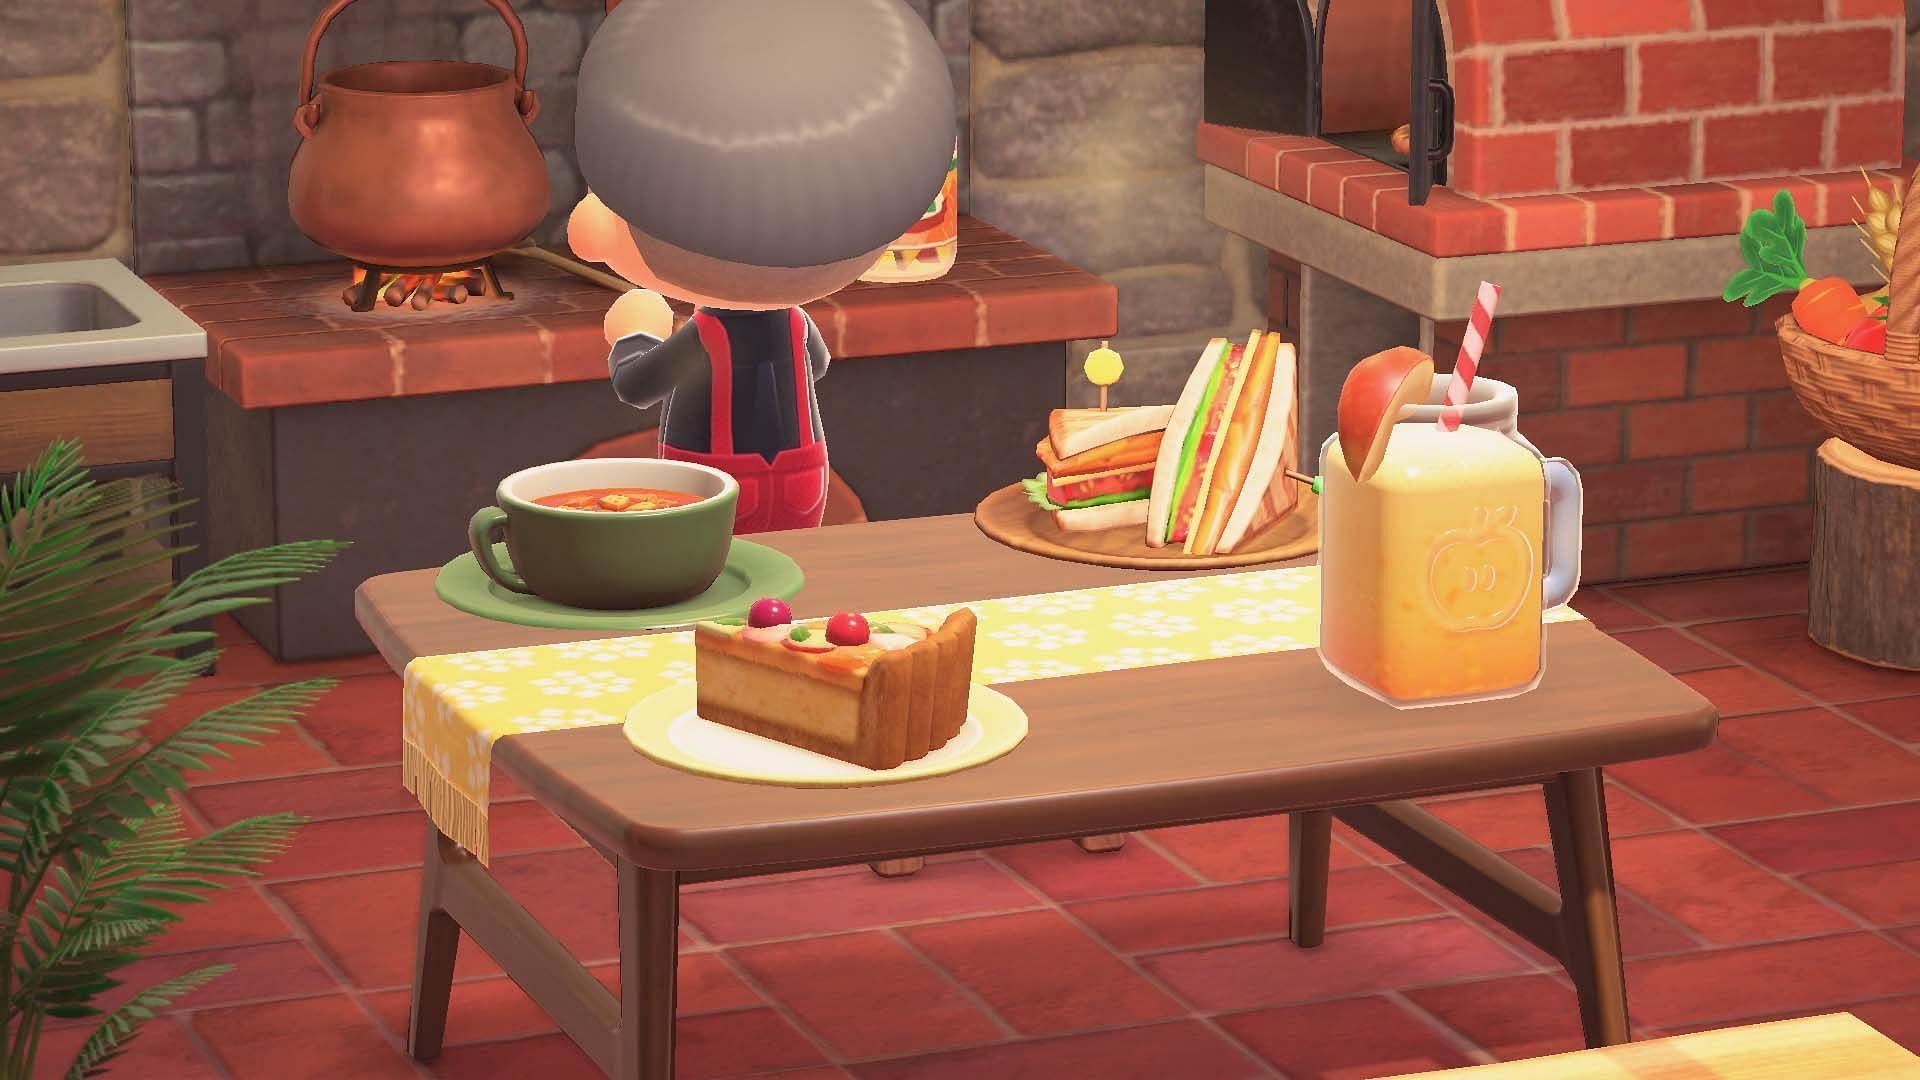 Animal Crossing: New Horizons players can get their hands on some very cool DIY recipes in the game (Image via Animal Crossing World)